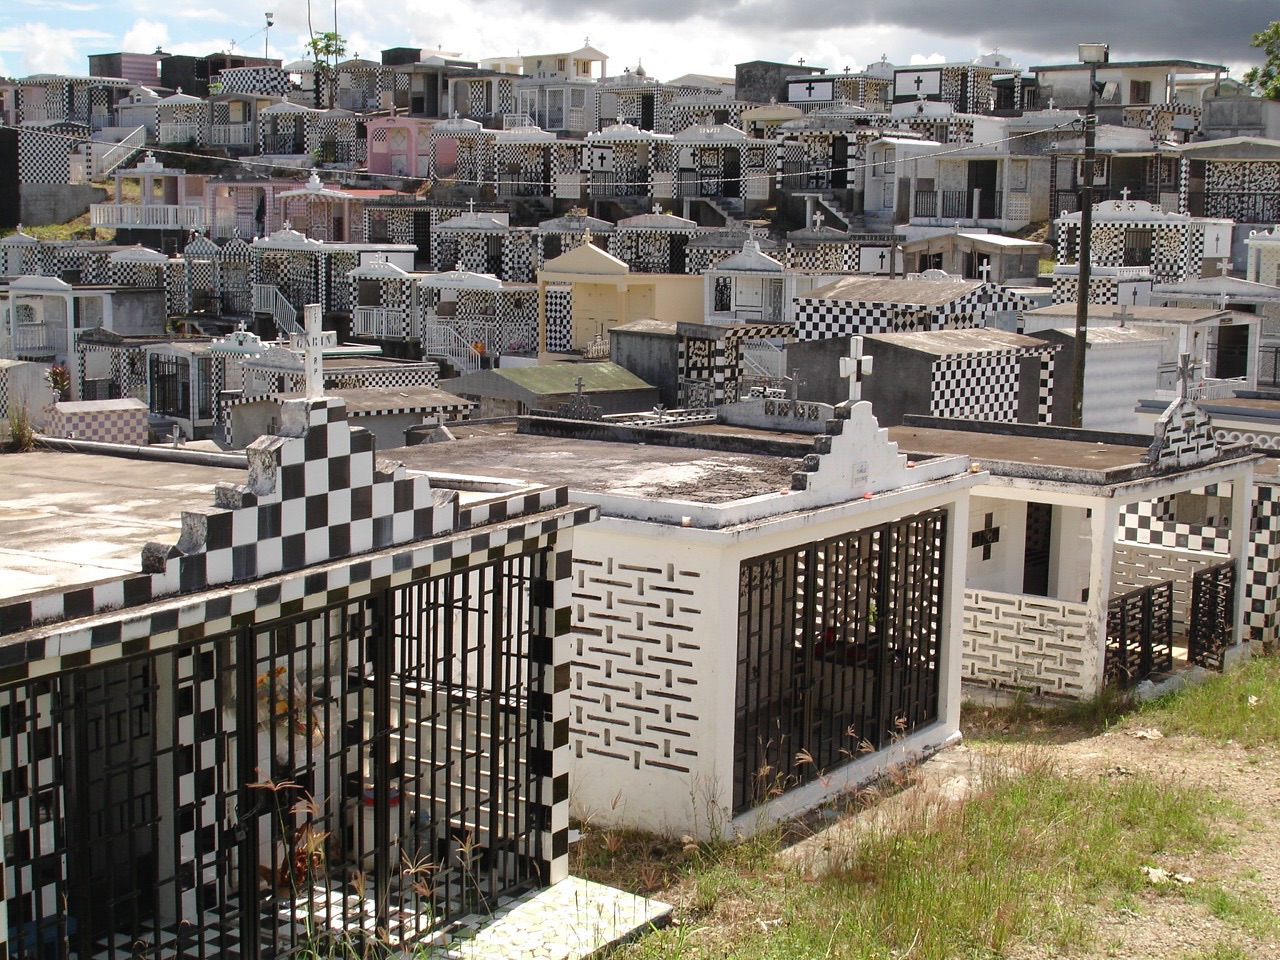 15 – Cemetery, Guadeloupe